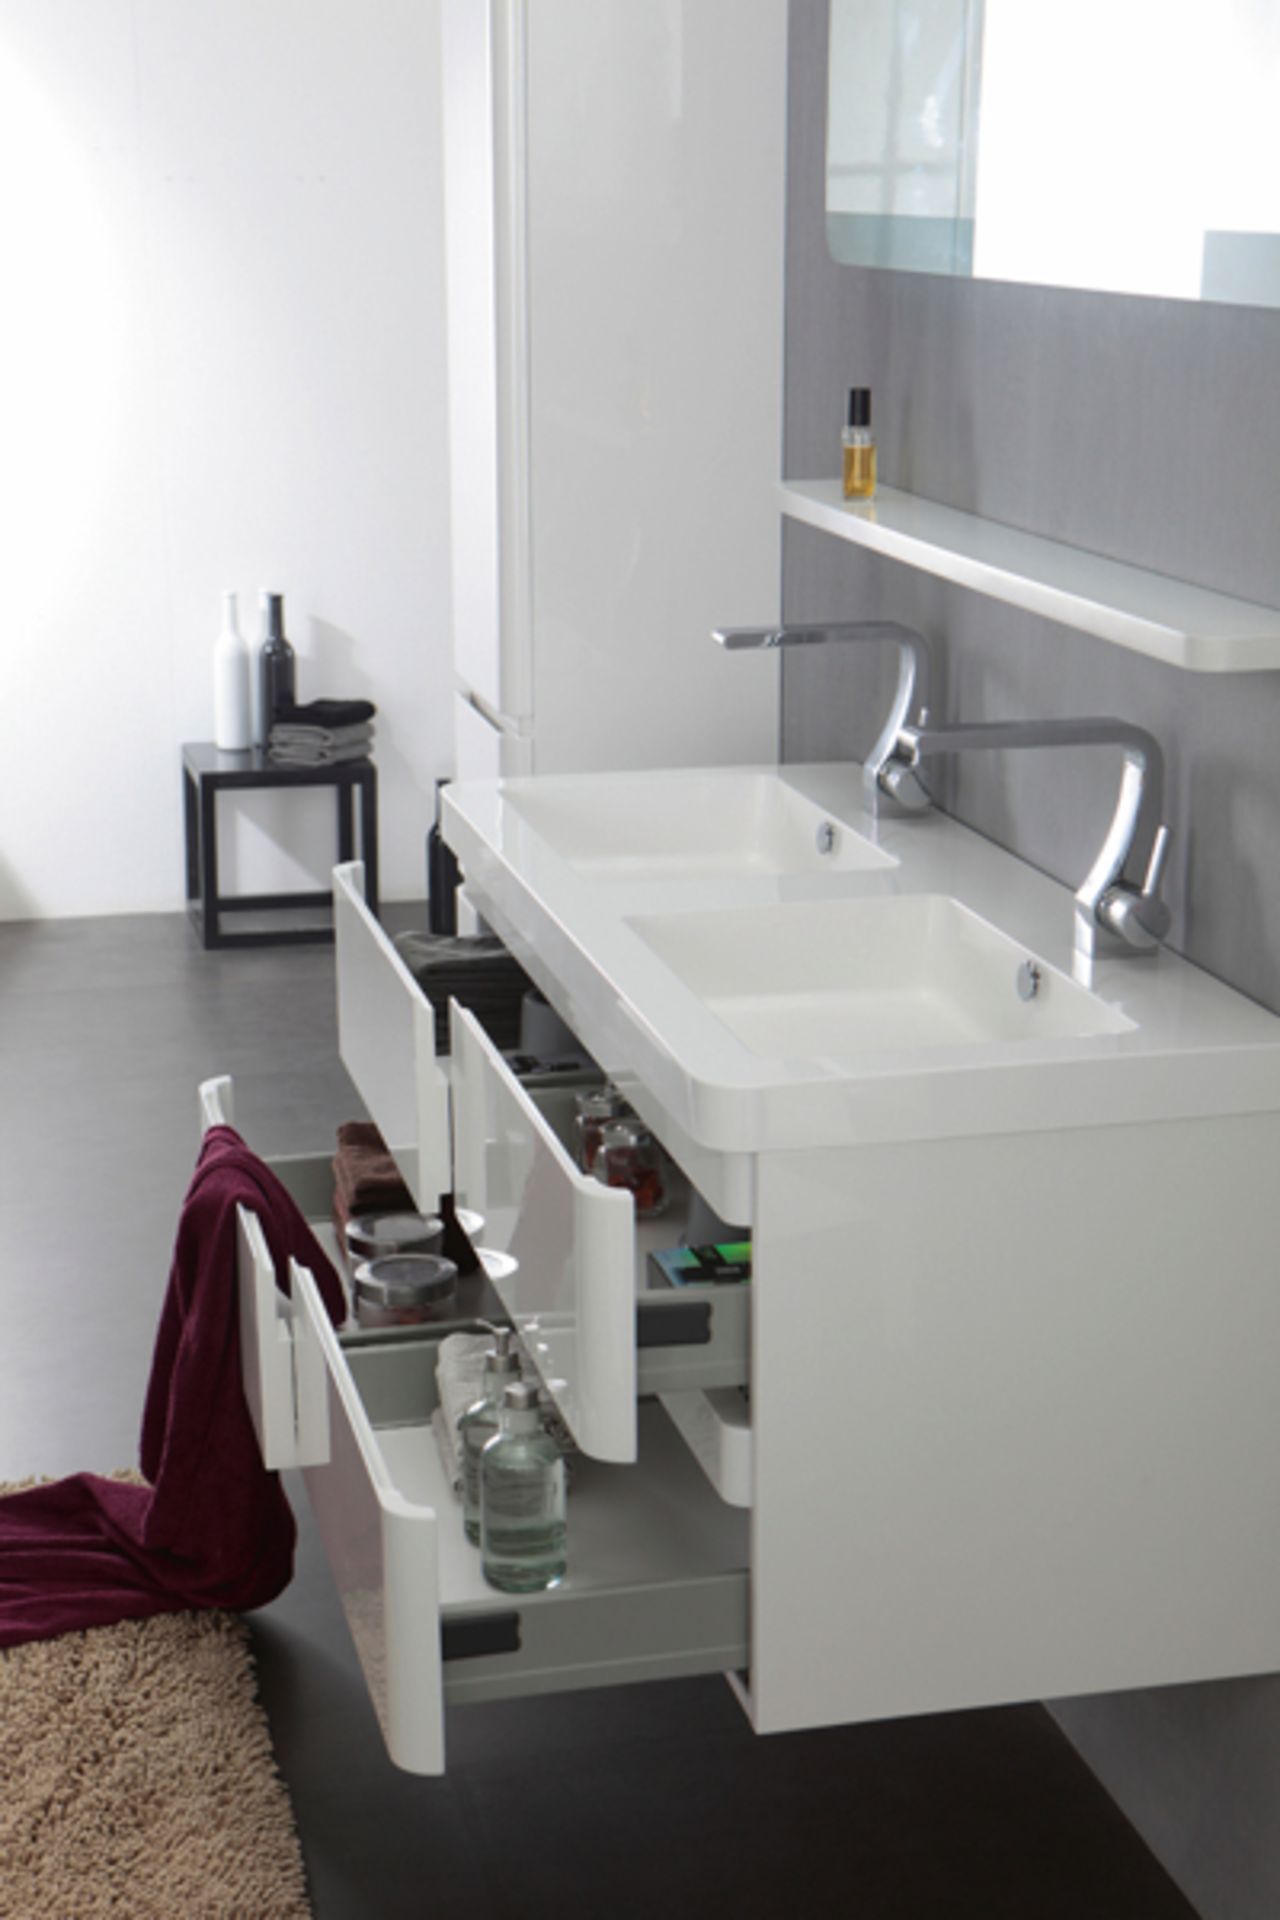 6 x Austin Bathrooms Urban 120 Wall Mounted Bathroom Vanity Units Without Sink Basins - 120cm Wide - Image 4 of 4